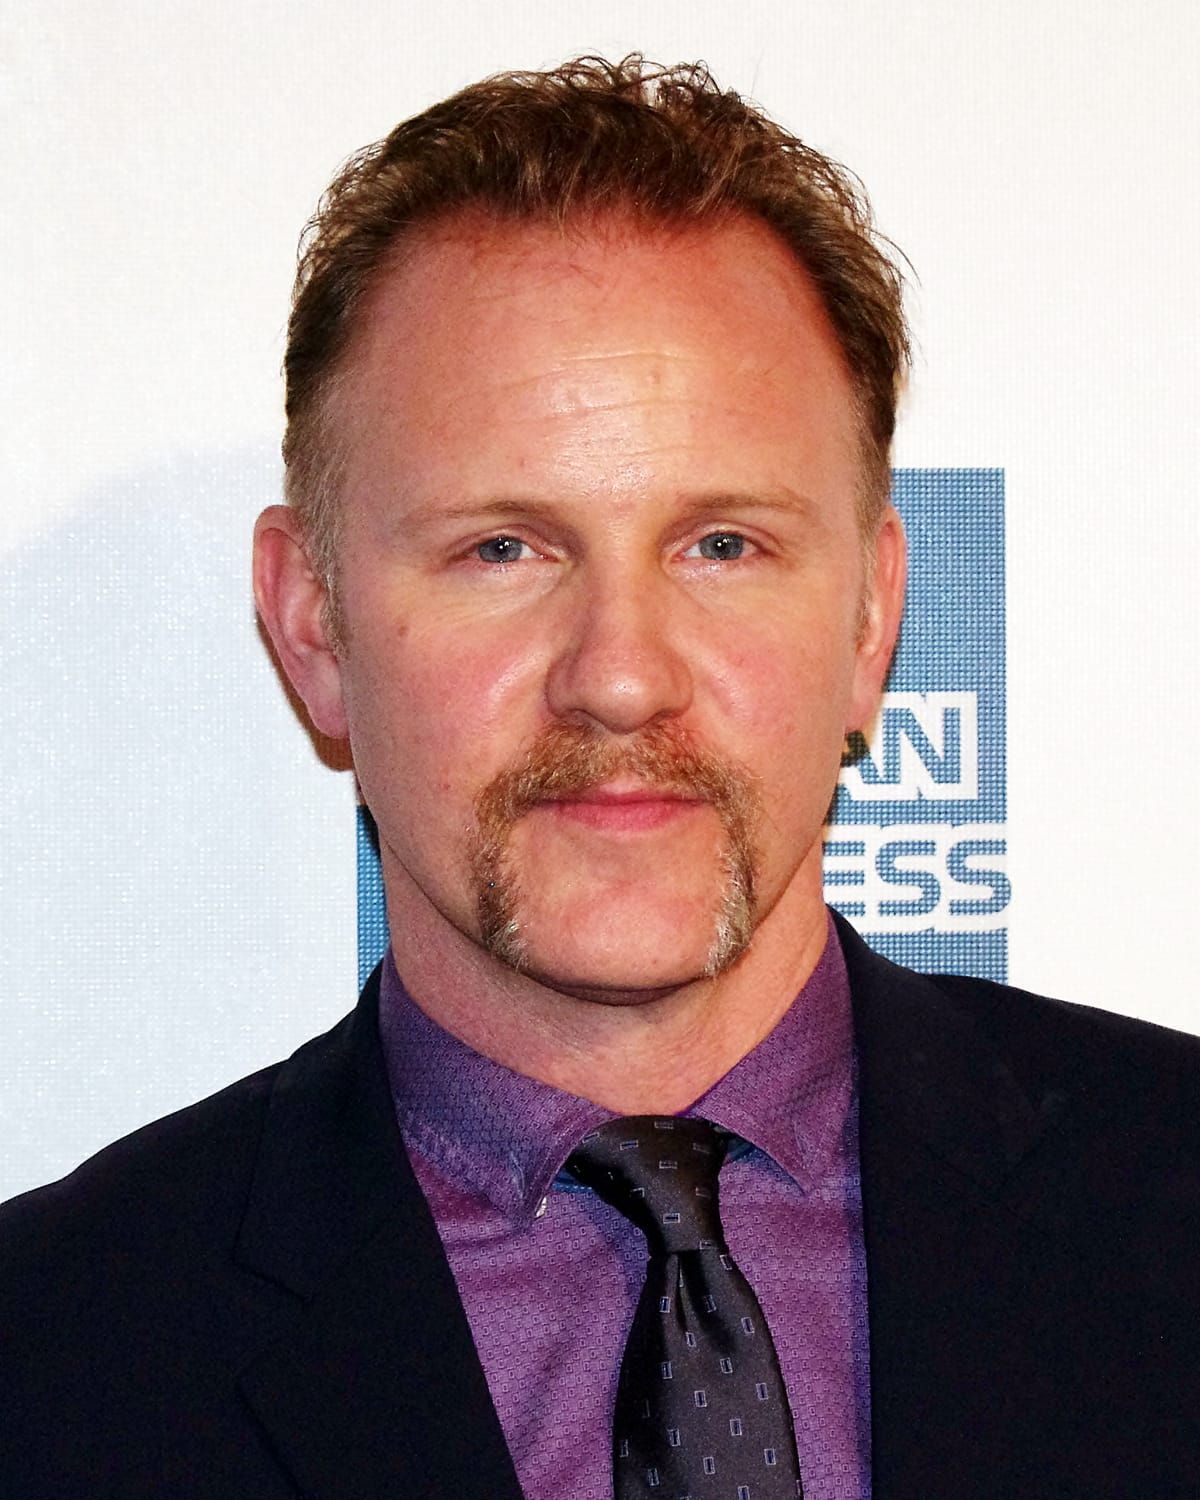 Morgan Spurlock, Acclaimed 'Super Size Me' Director, Dies at 53